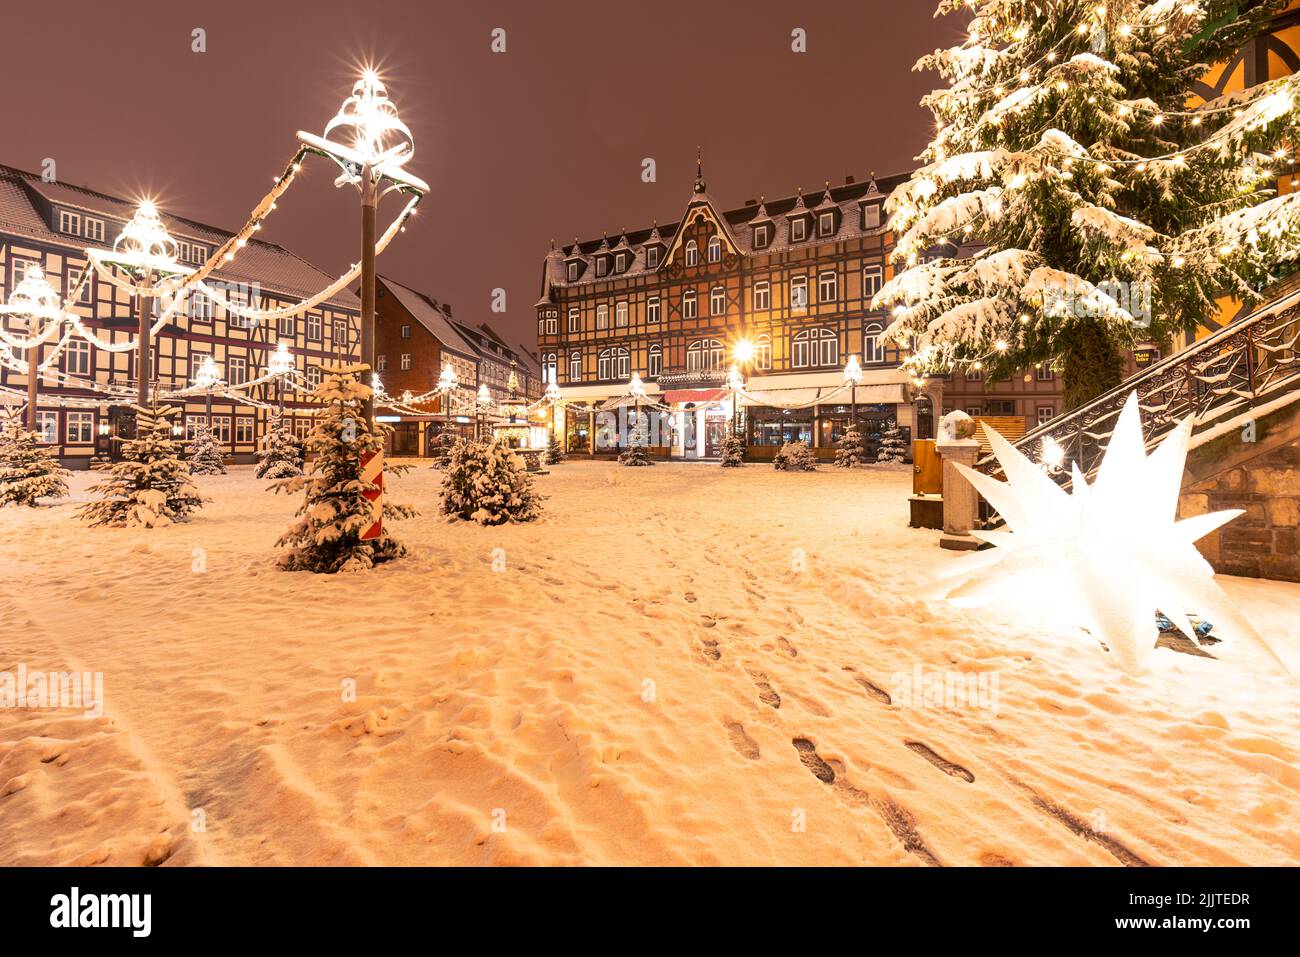 Wernigerode town hall and market square in the Harz Mountains. Winter and snowy at night with Christmas lights Stock Photo